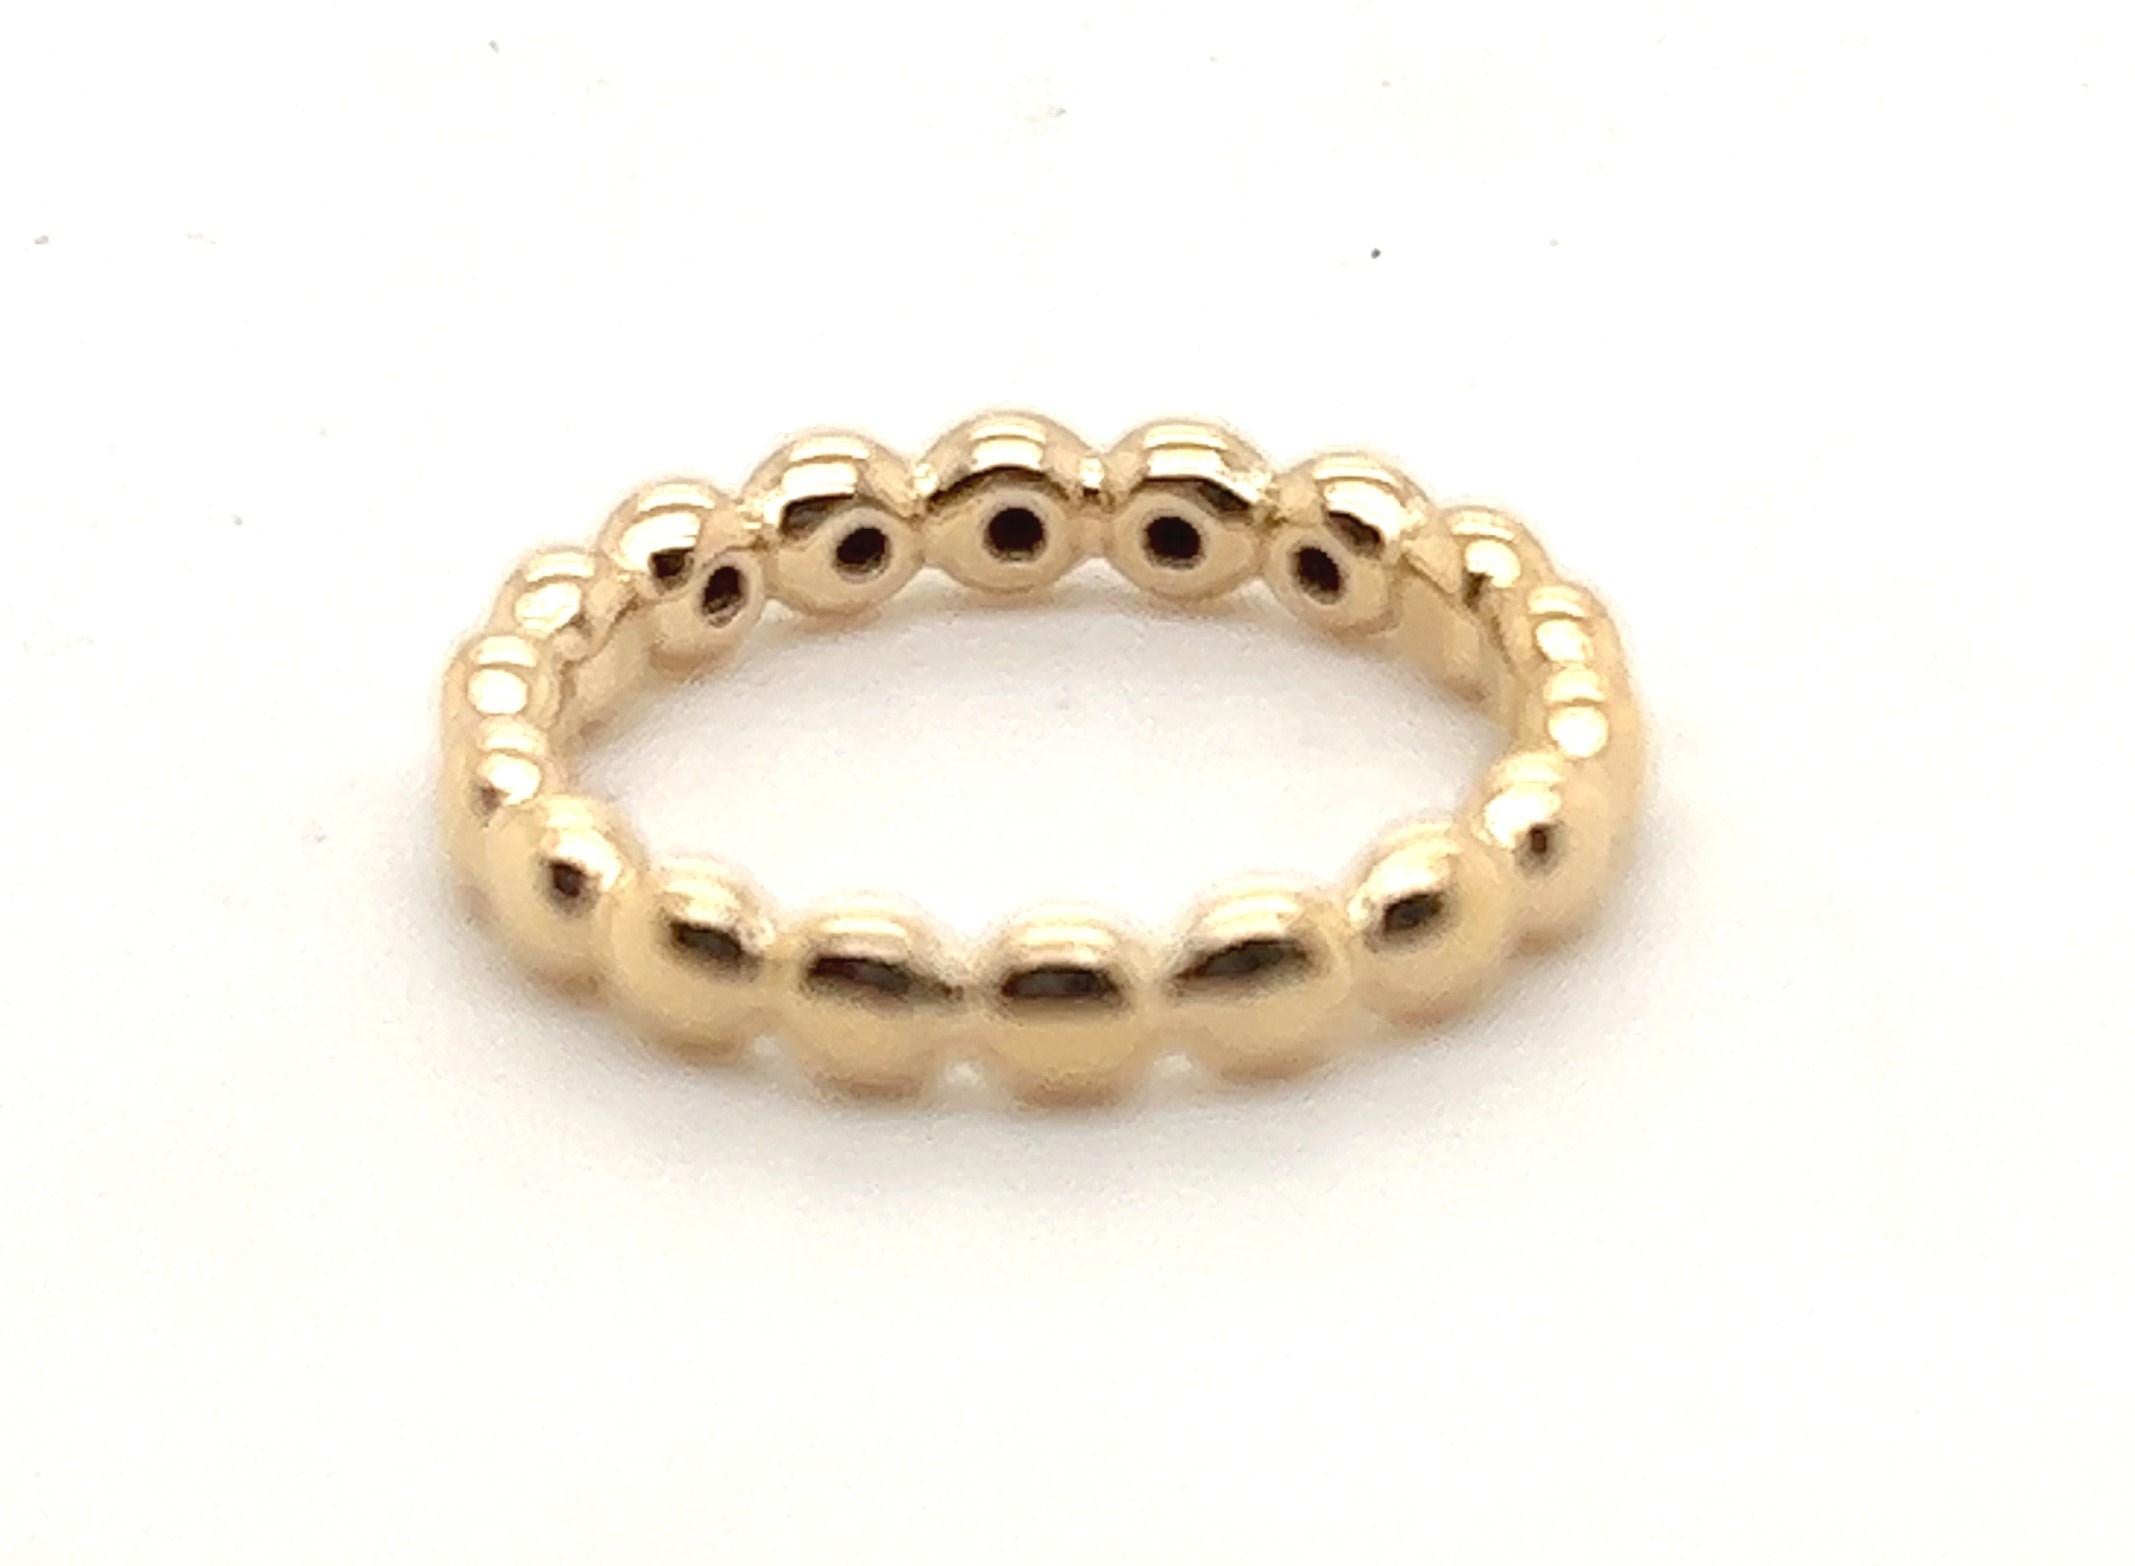 14kt yellow gold band from Pandora's Bubble line. This one contains their five Black Ice stones bezel set in the center of the ring. 

The ring measures 1/8 inch from top to bottom and is a finger size 6.

This was meant to stack with other Pandora